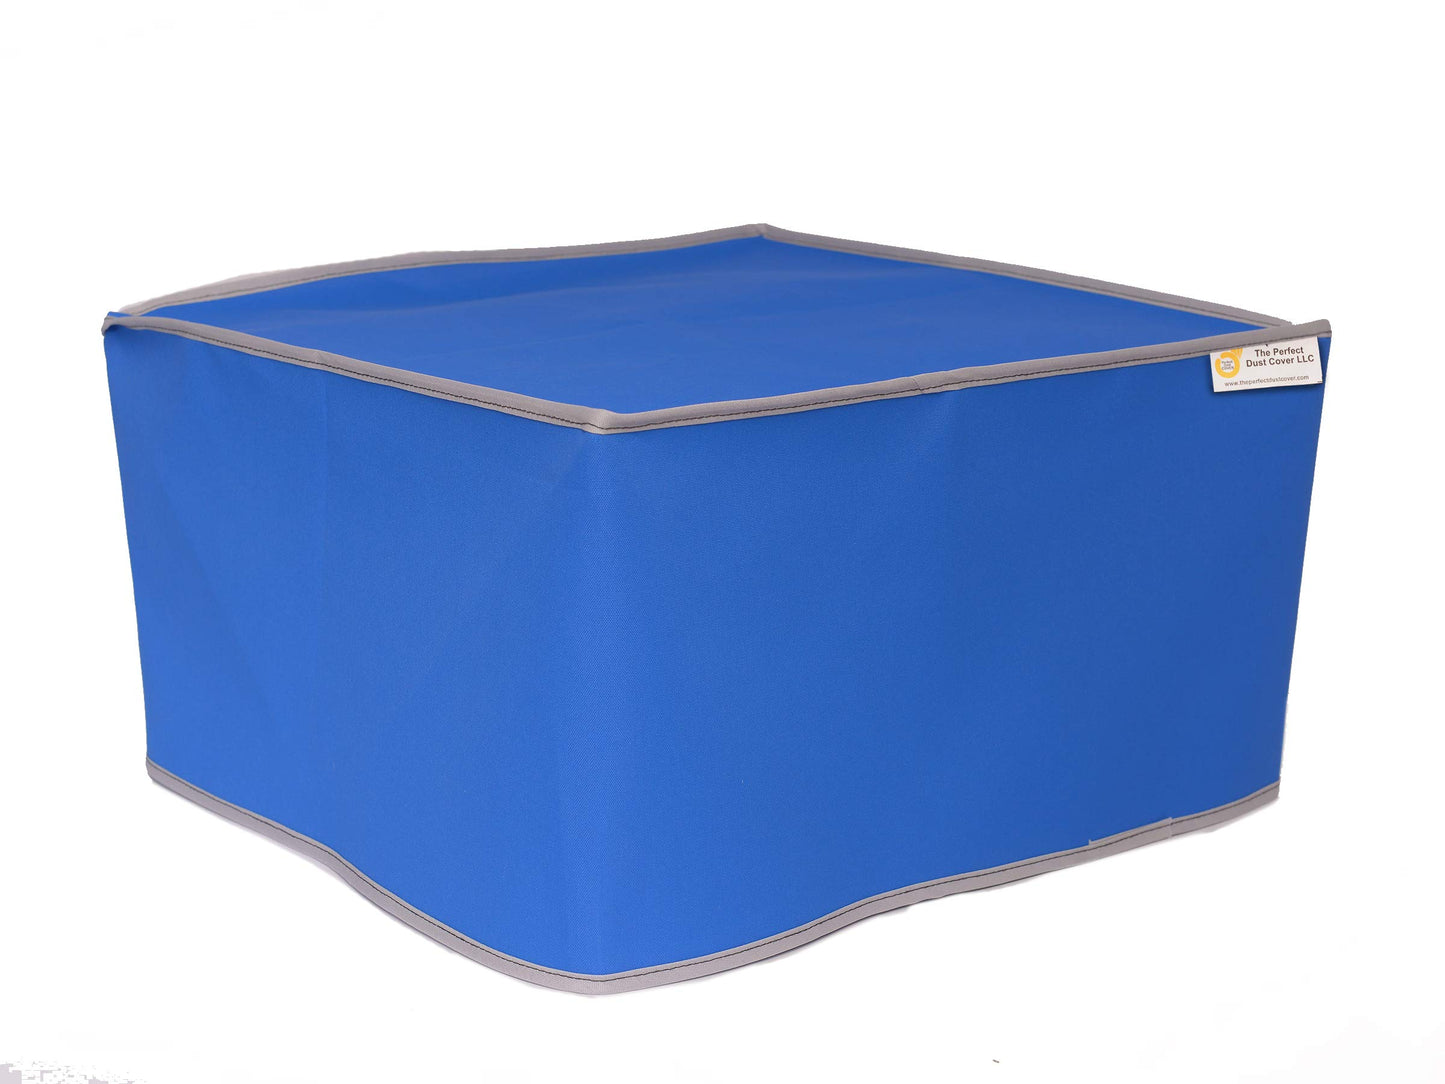 The Perfect Dust Cover, Royal Blue Nylon Cover for Epson SureColor F500 Dye-Sublimation Without Stand Printer, Anti Static Waterproof, Dimensions, 38''W x 20.7''D x 9.6''H by The Perfect Dust Cover